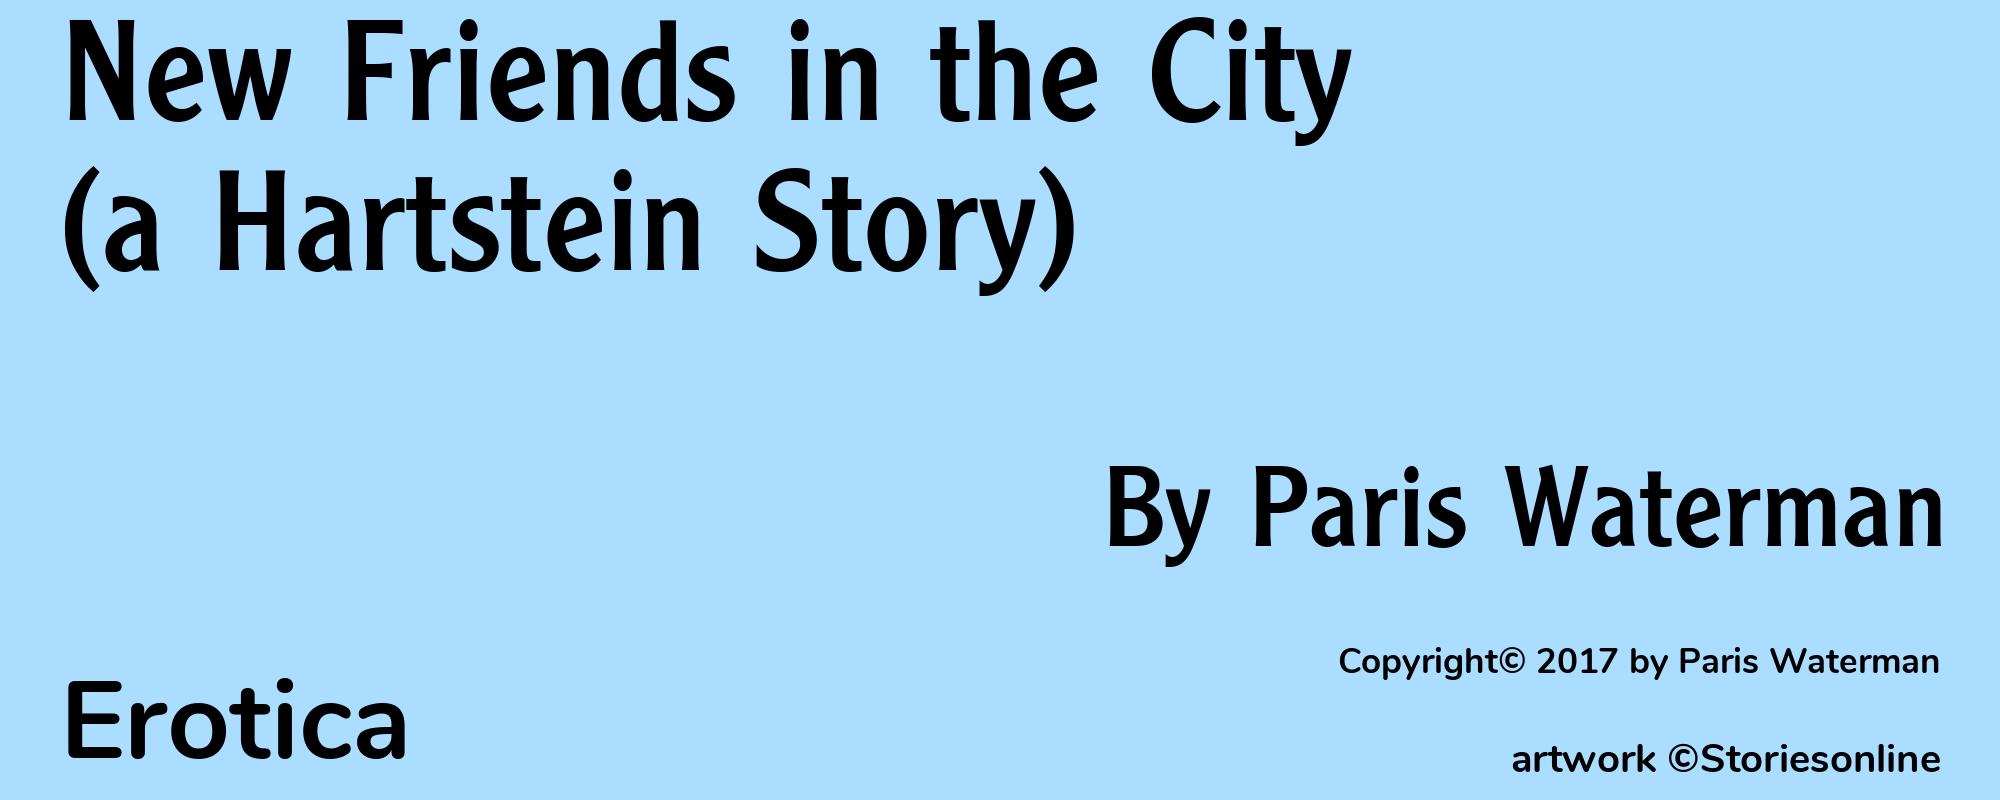 New Friends in the City (a Hartstein Story) - Cover